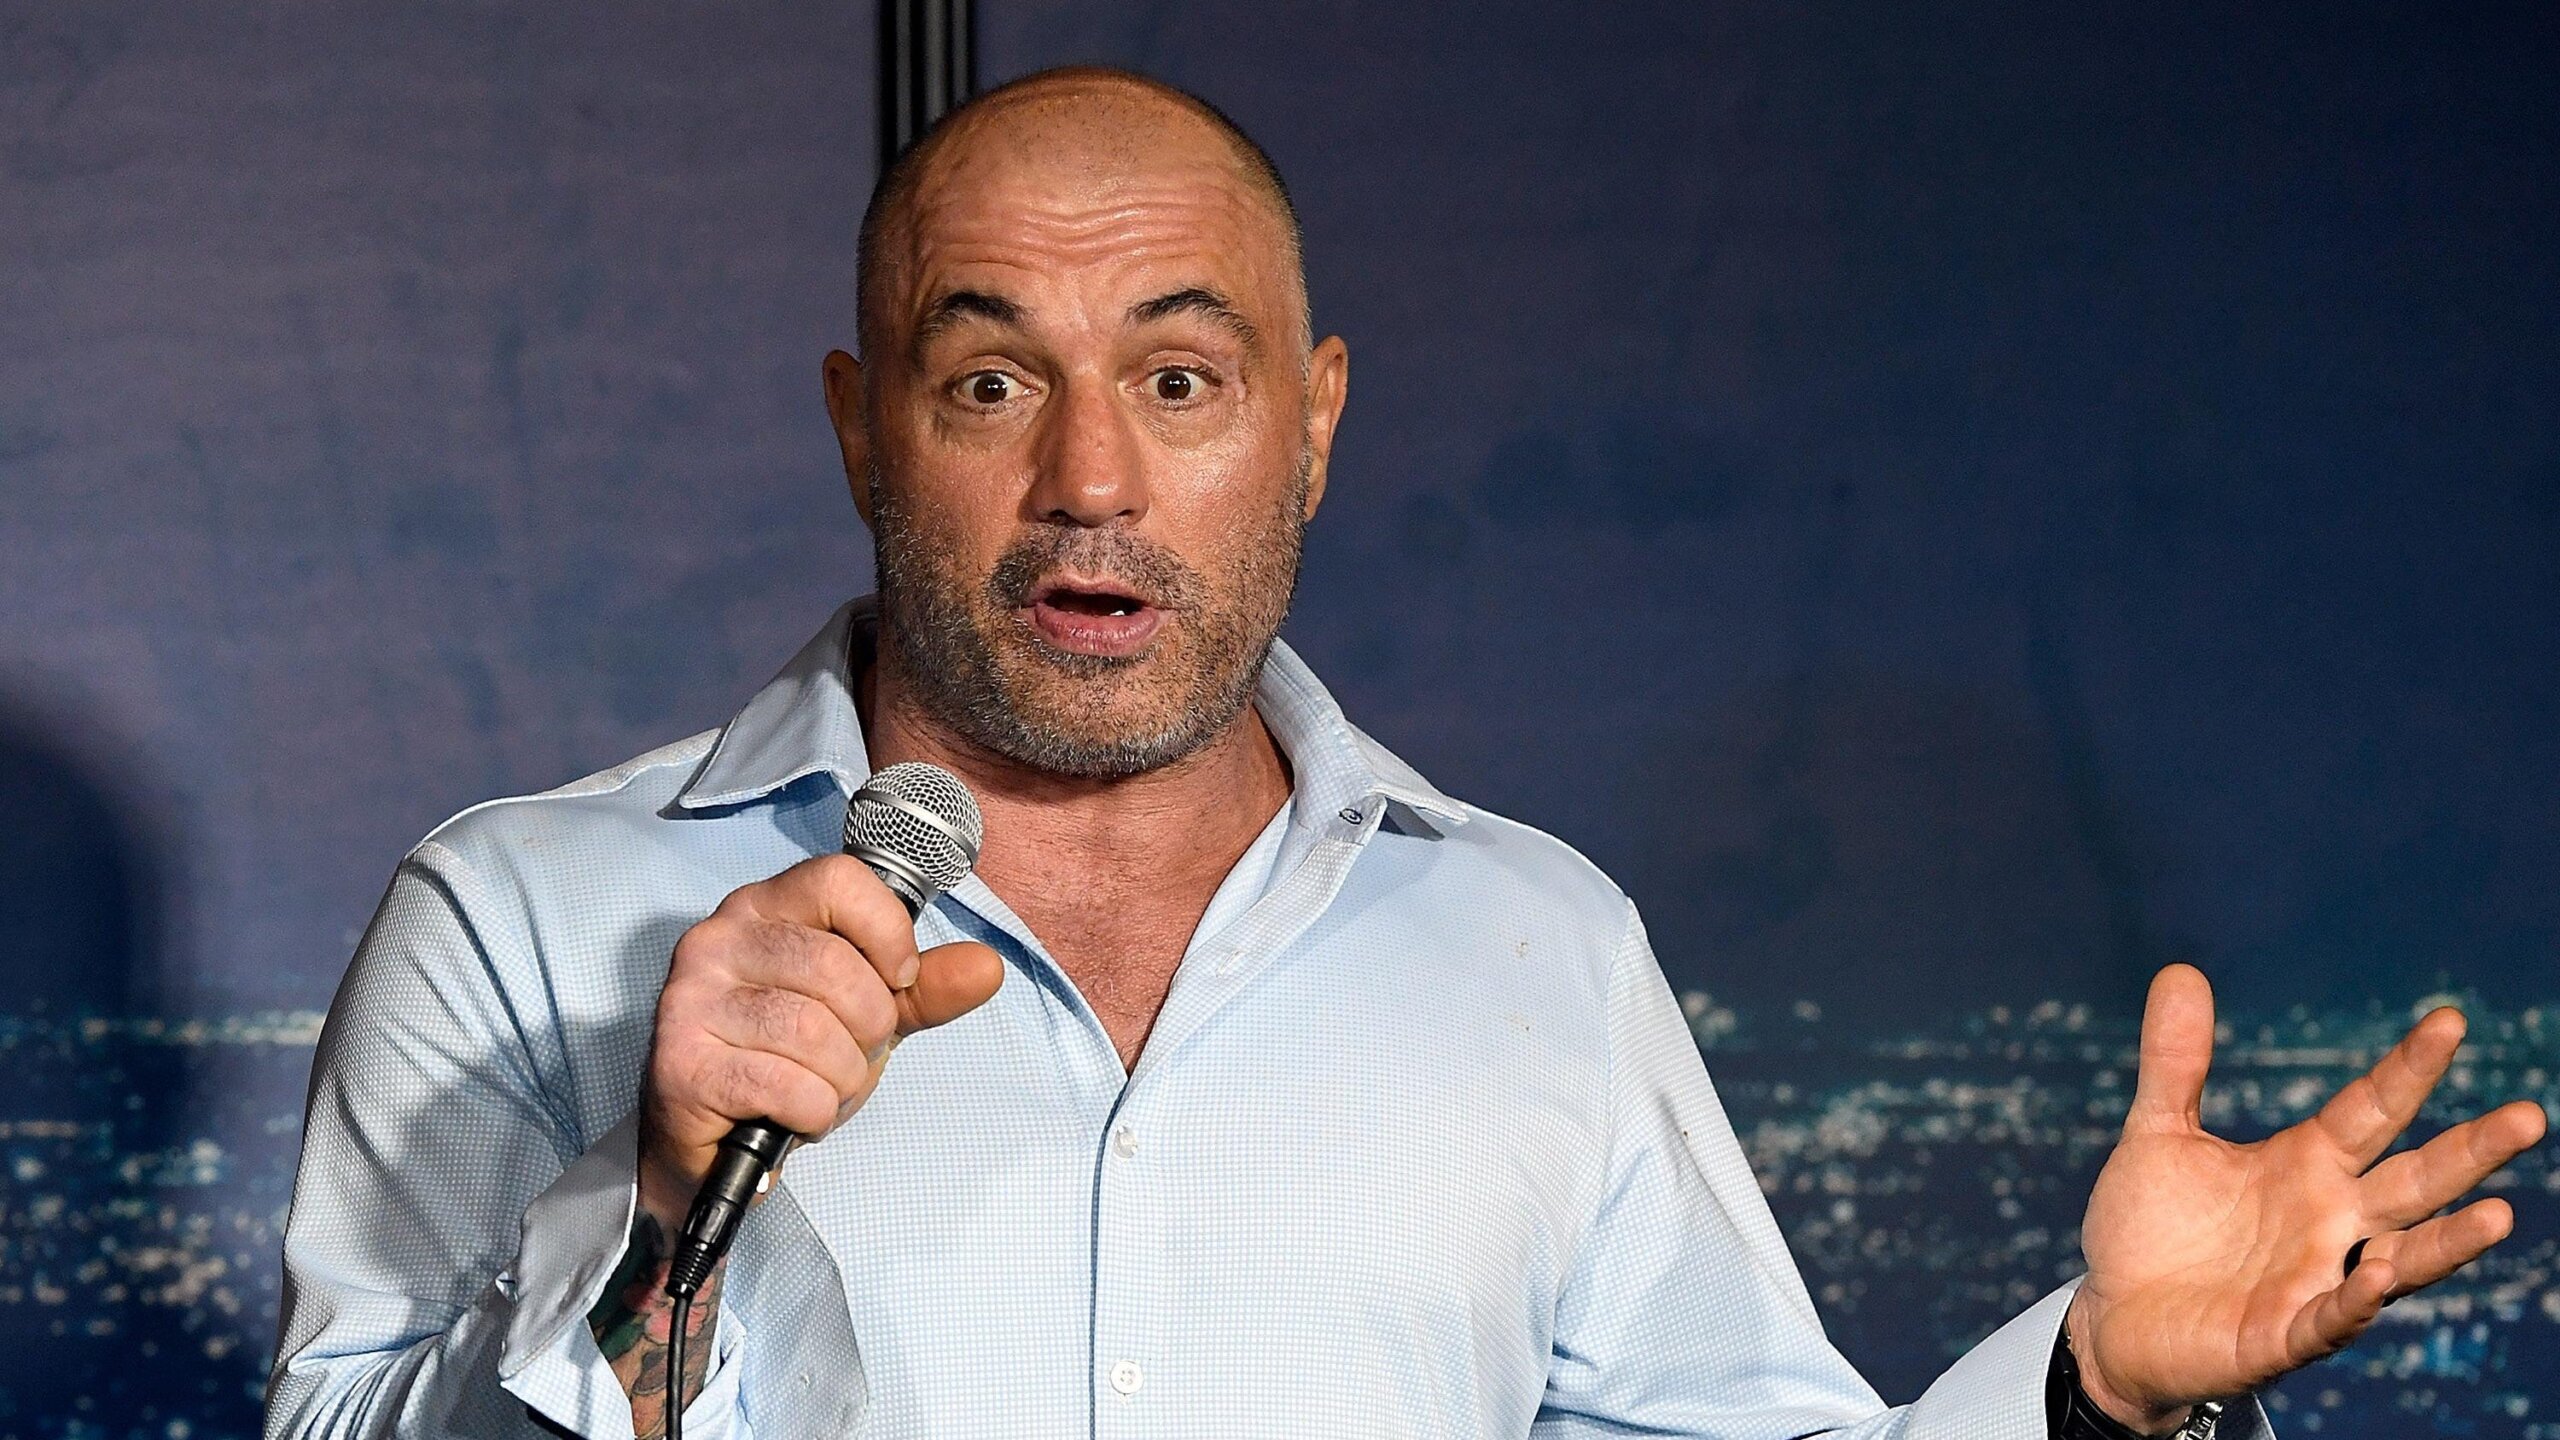 Spotify Pulls Extra Than 110 Episodes Of Joe Rogan’s Podcast